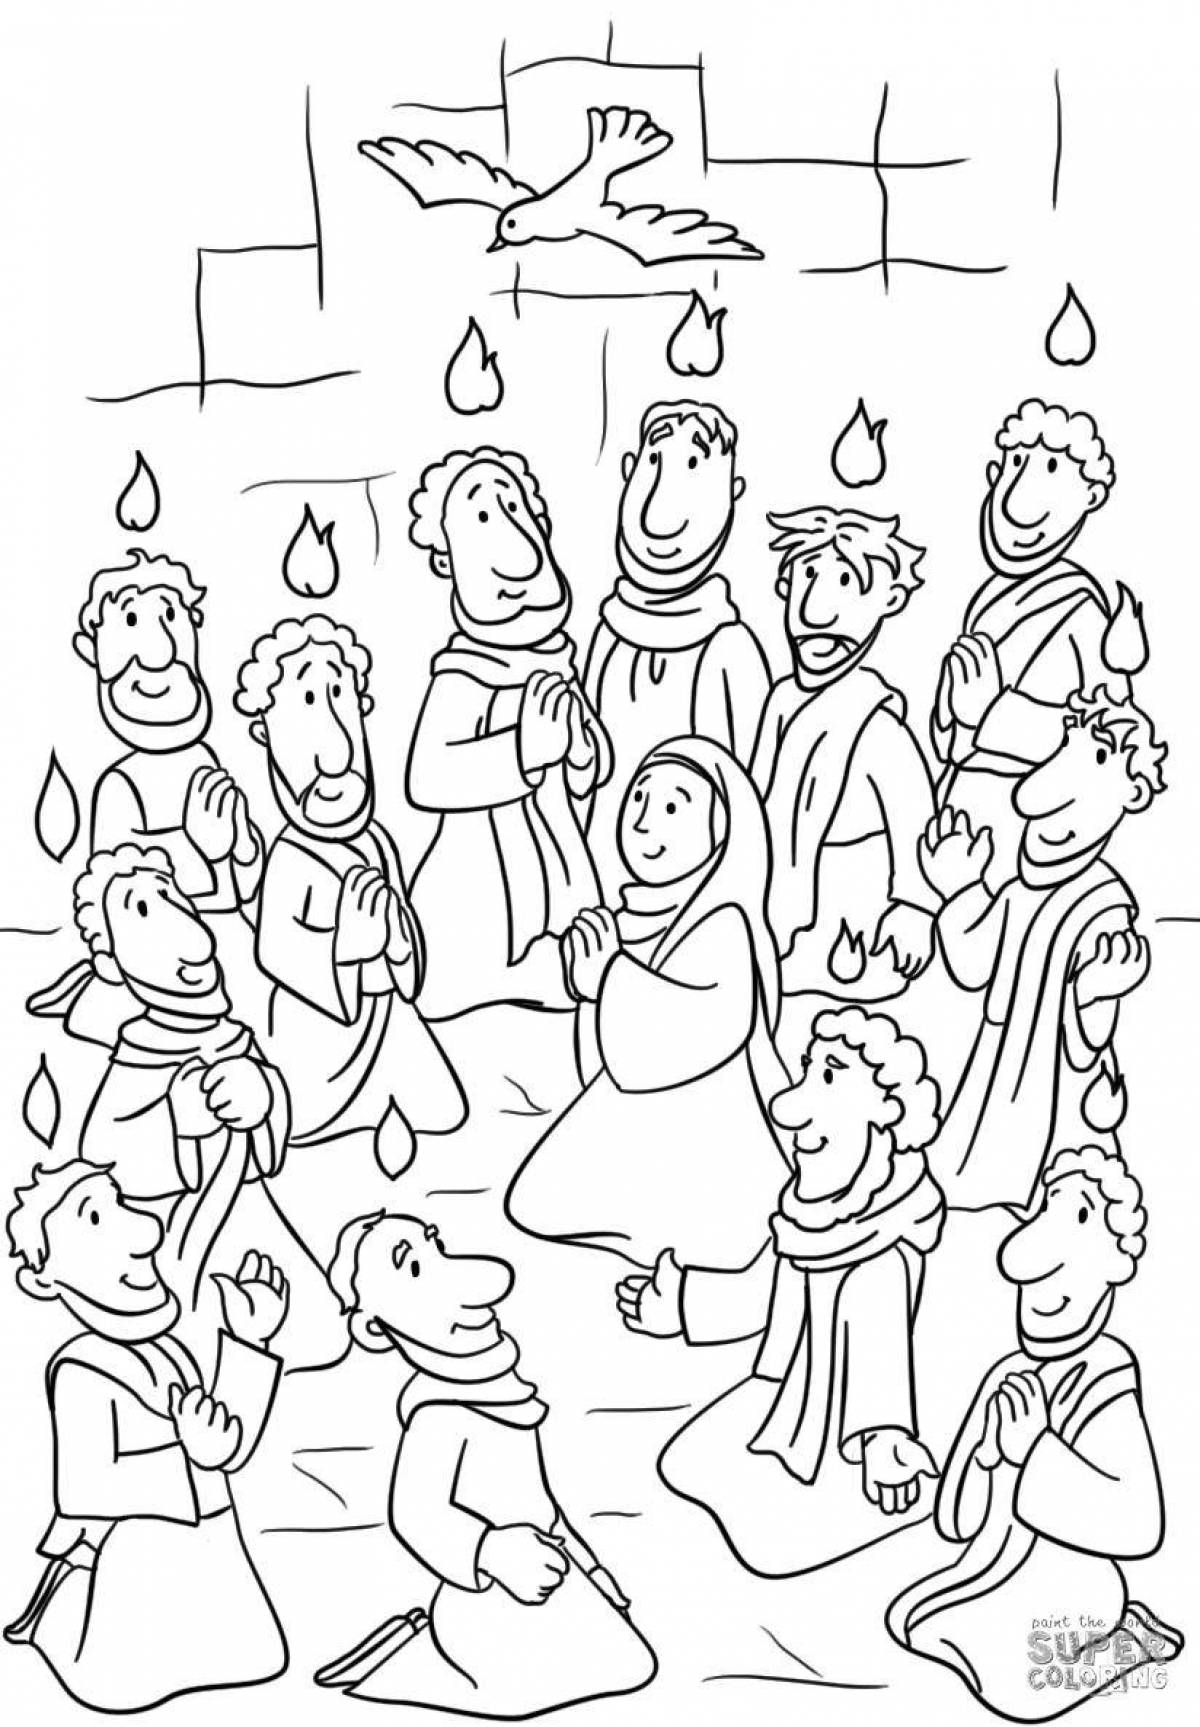 Playful sunday school coloring page